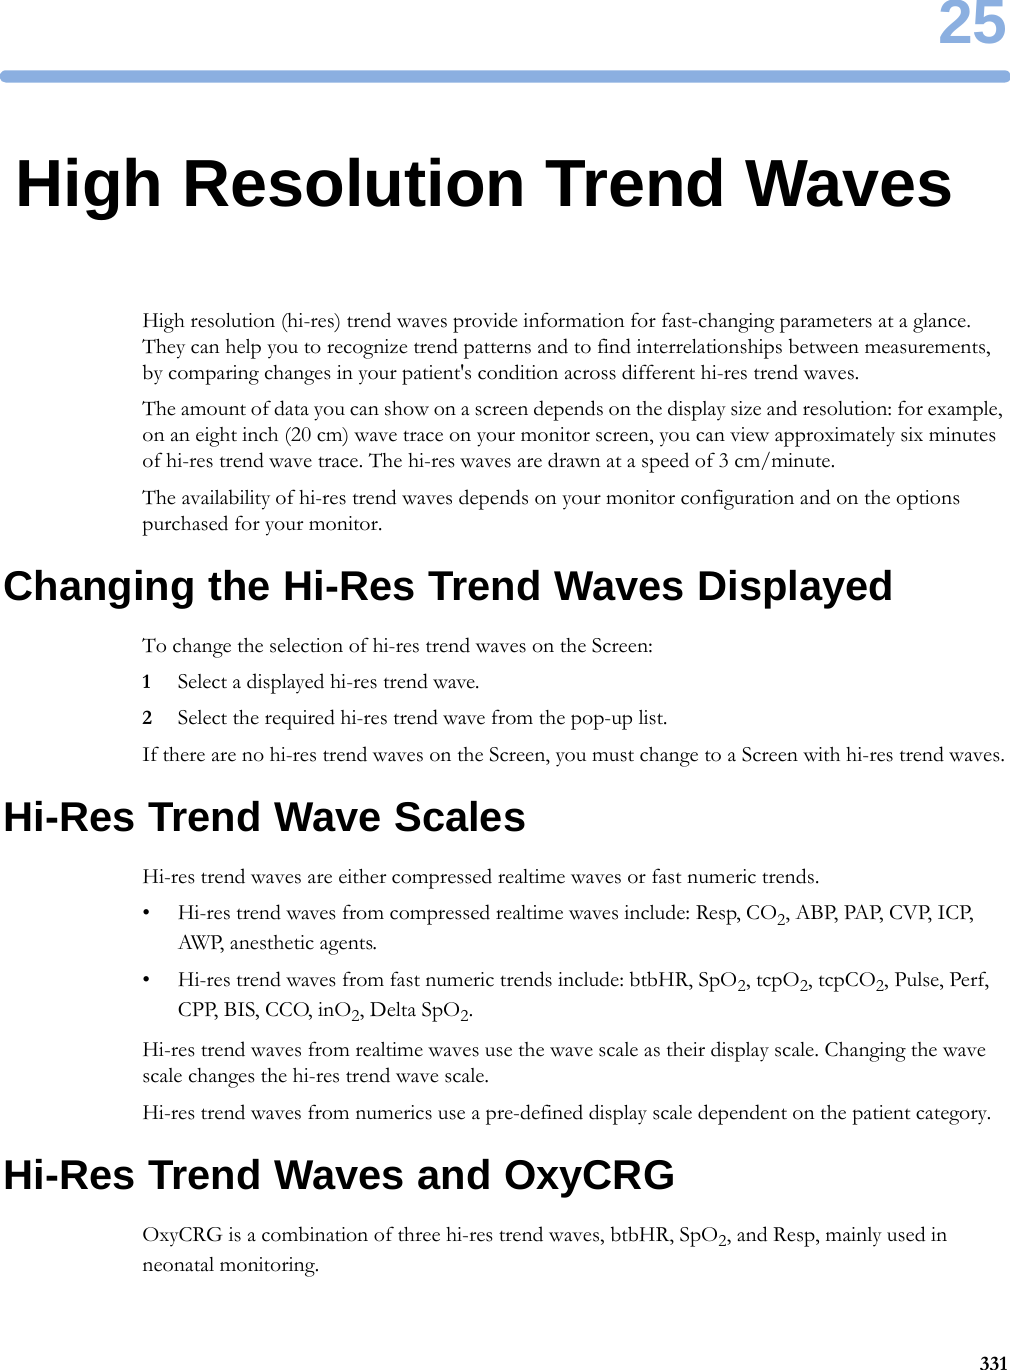 2533125High Resolution Trend WavesHigh resolution (hi-res) trend waves provide information for fast-changing parameters at a glance. They can help you to recognize trend patterns and to find interrelationships between measurements, by comparing changes in your patient&apos;s condition across different hi-res trend waves.The amount of data you can show on a screen depends on the display size and resolution: for example, on an eight inch (20 cm) wave trace on your monitor screen, you can view approximately six minutes of hi-res trend wave trace. The hi-res waves are drawn at a speed of 3 cm/minute.The availability of hi-res trend waves depends on your monitor configuration and on the options purchased for your monitor.Changing the Hi-Res Trend Waves DisplayedTo change the selection of hi-res trend waves on the Screen:1Select a displayed hi-res trend wave.2Select the required hi-res trend wave from the pop-up list.If there are no hi-res trend waves on the Screen, you must change to a Screen with hi-res trend waves.Hi-Res Trend Wave ScalesHi-res trend waves are either compressed realtime waves or fast numeric trends.• Hi-res trend waves from compressed realtime waves include: Resp, CO2, ABP,  PAP, CV P,  I C P, AWP, anesthetic agents.• Hi-res trend waves from fast numeric trends include: btbHR, SpO2, tcpO2, tcpCO2, Pulse, Perf, CPP, BIS, CCO, inO2, Delta SpO2.Hi-res trend waves from realtime waves use the wave scale as their display scale. Changing the wave scale changes the hi-res trend wave scale.Hi-res trend waves from numerics use a pre-defined display scale dependent on the patient category.Hi-Res Trend Waves and OxyCRGOxyCRG is a combination of three hi-res trend waves, btbHR, SpO2, and Resp, mainly used in neonatal monitoring.